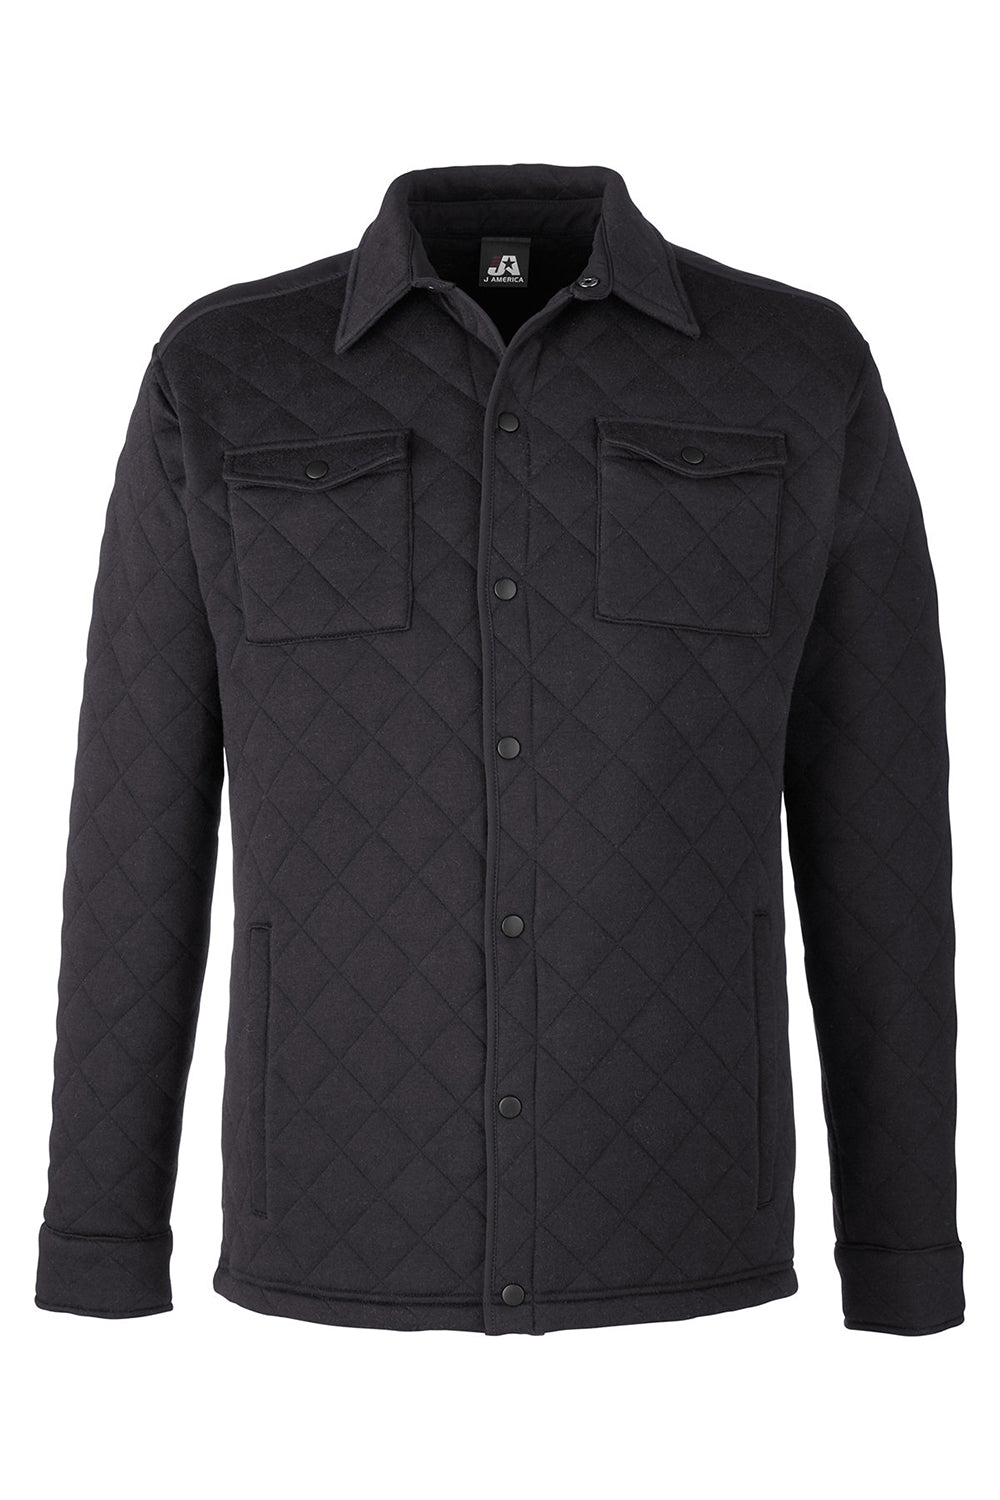 J America JA8889 Mens Quilted Jersey Button Down Shirt Jacket Black Flat Front